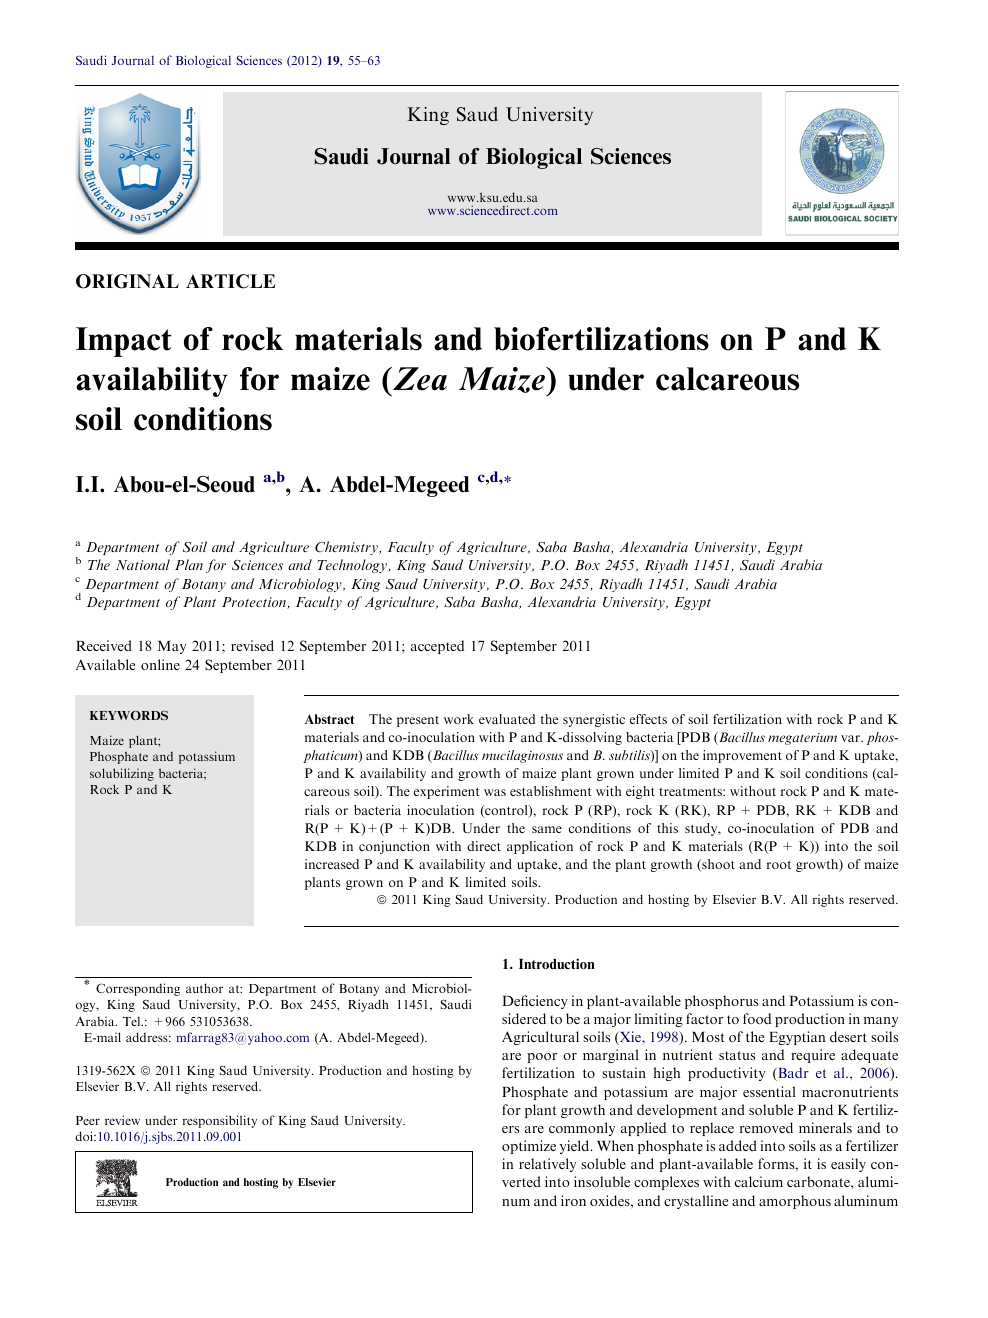 Impact Of Rock Materials And Biofertilizations On P And K Availability For Maize Zea Maize Under Calcareous Soil Conditions Topic Of Research Paper In Chemical Sciences Download Scholarly Article Pdf And